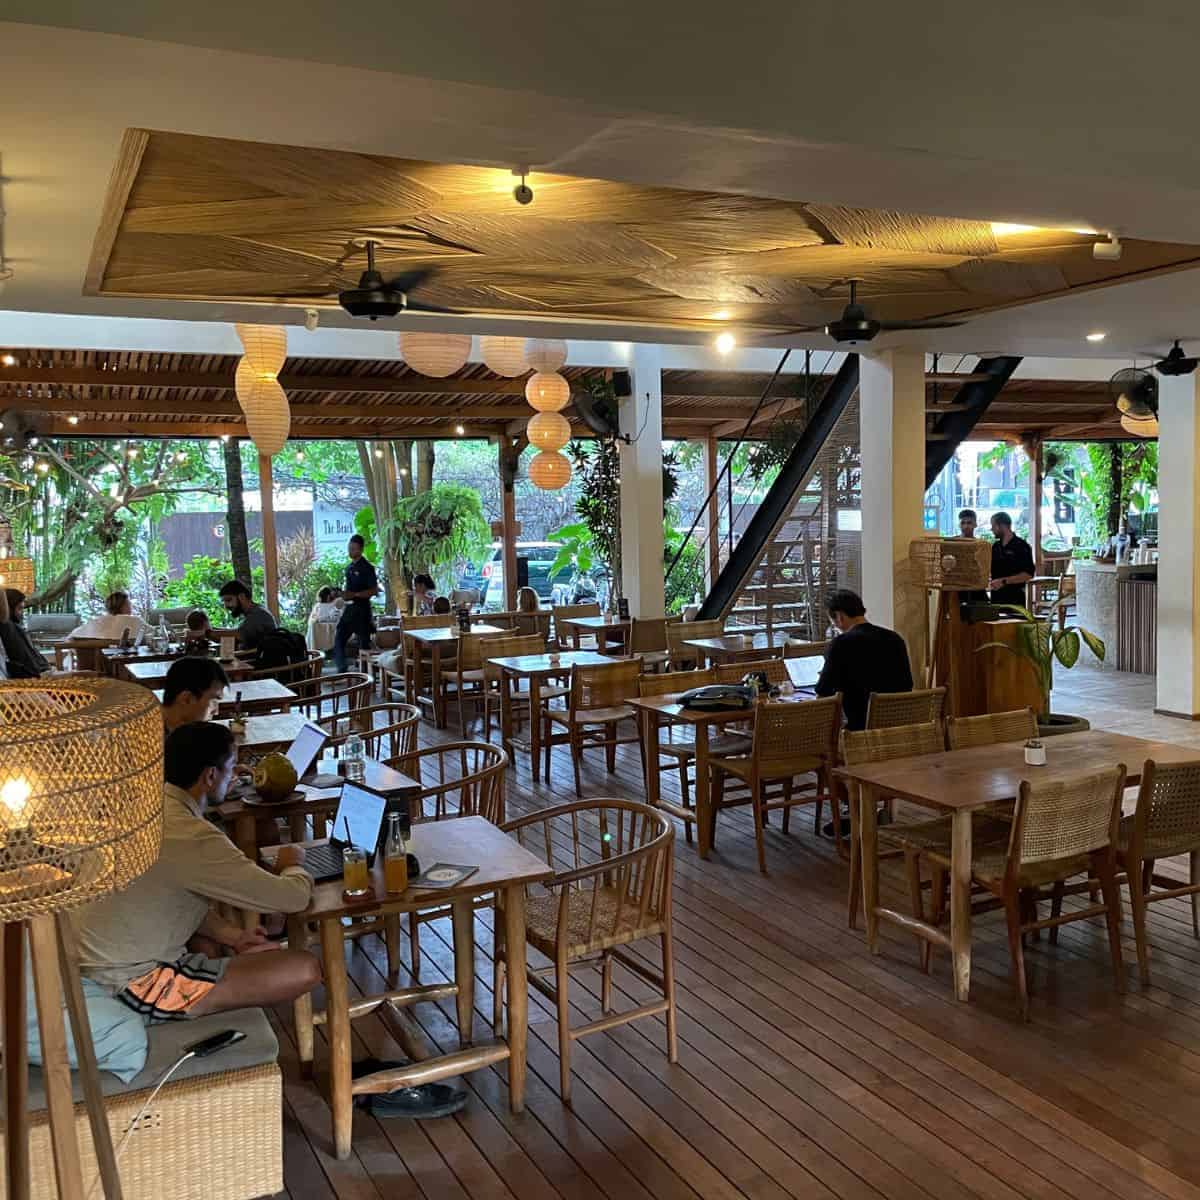 Zin cafe working hub for many expats in Bali